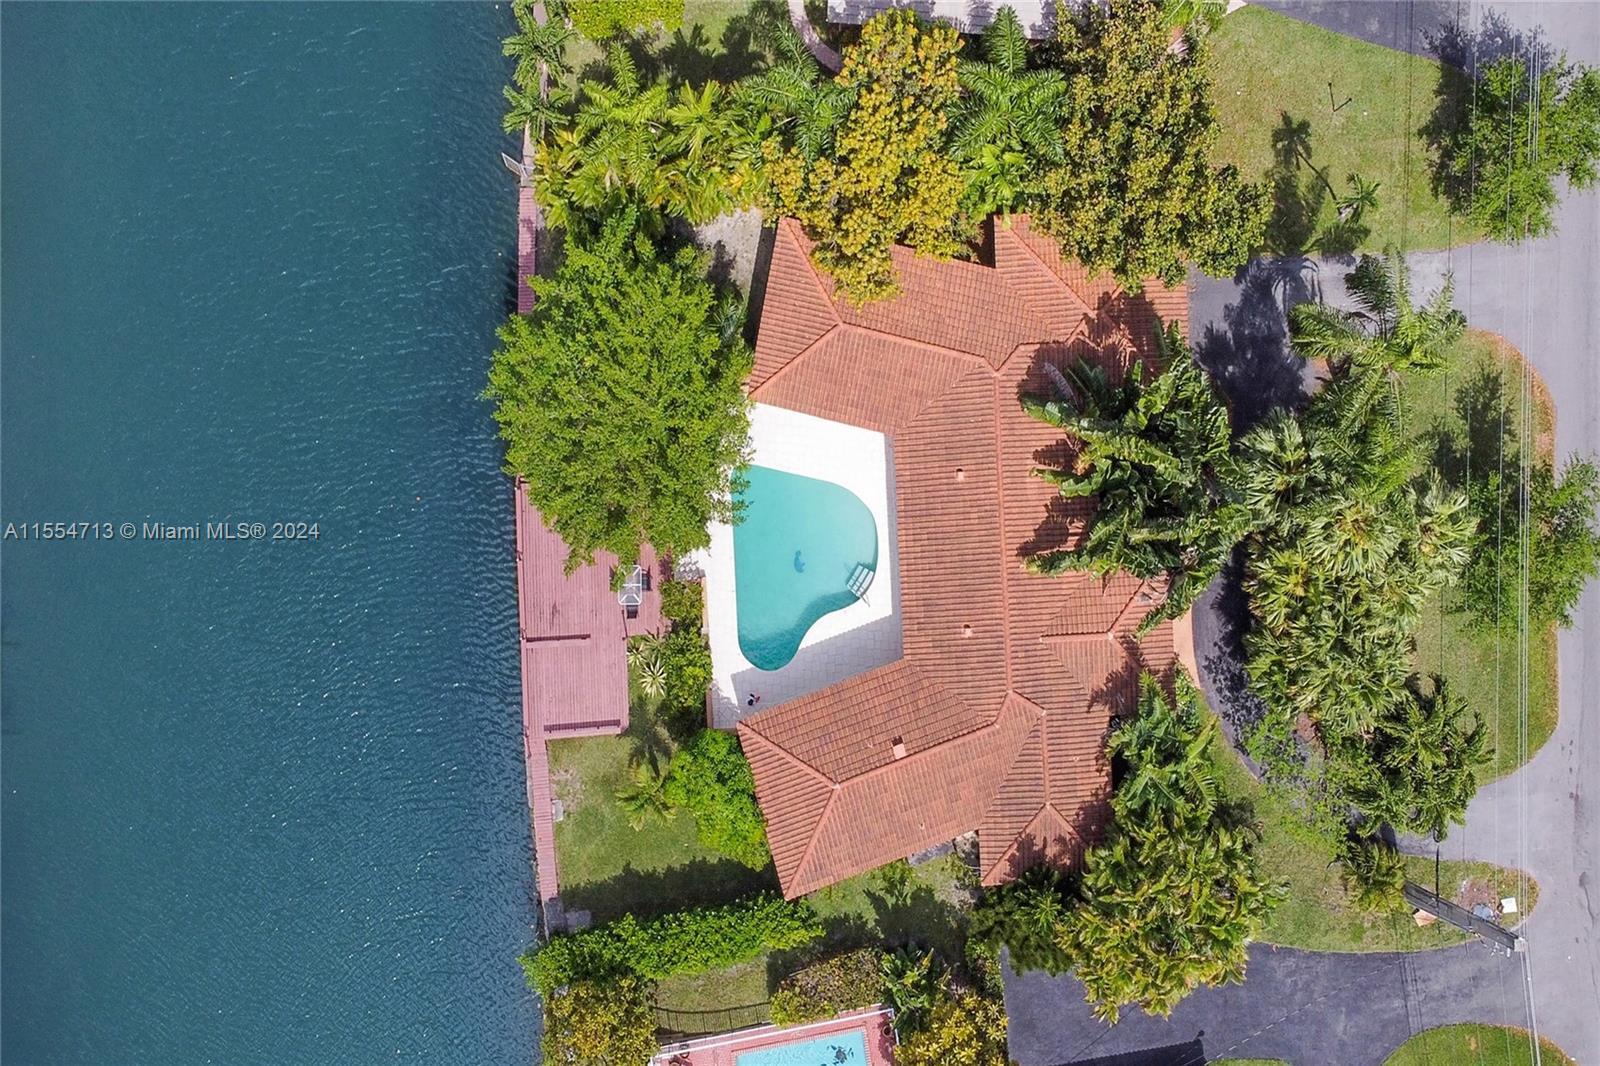 ATTENTION BOATERS & INVESTORS – waterfront homes in Coral Gables and Coconut Grove with ocean access